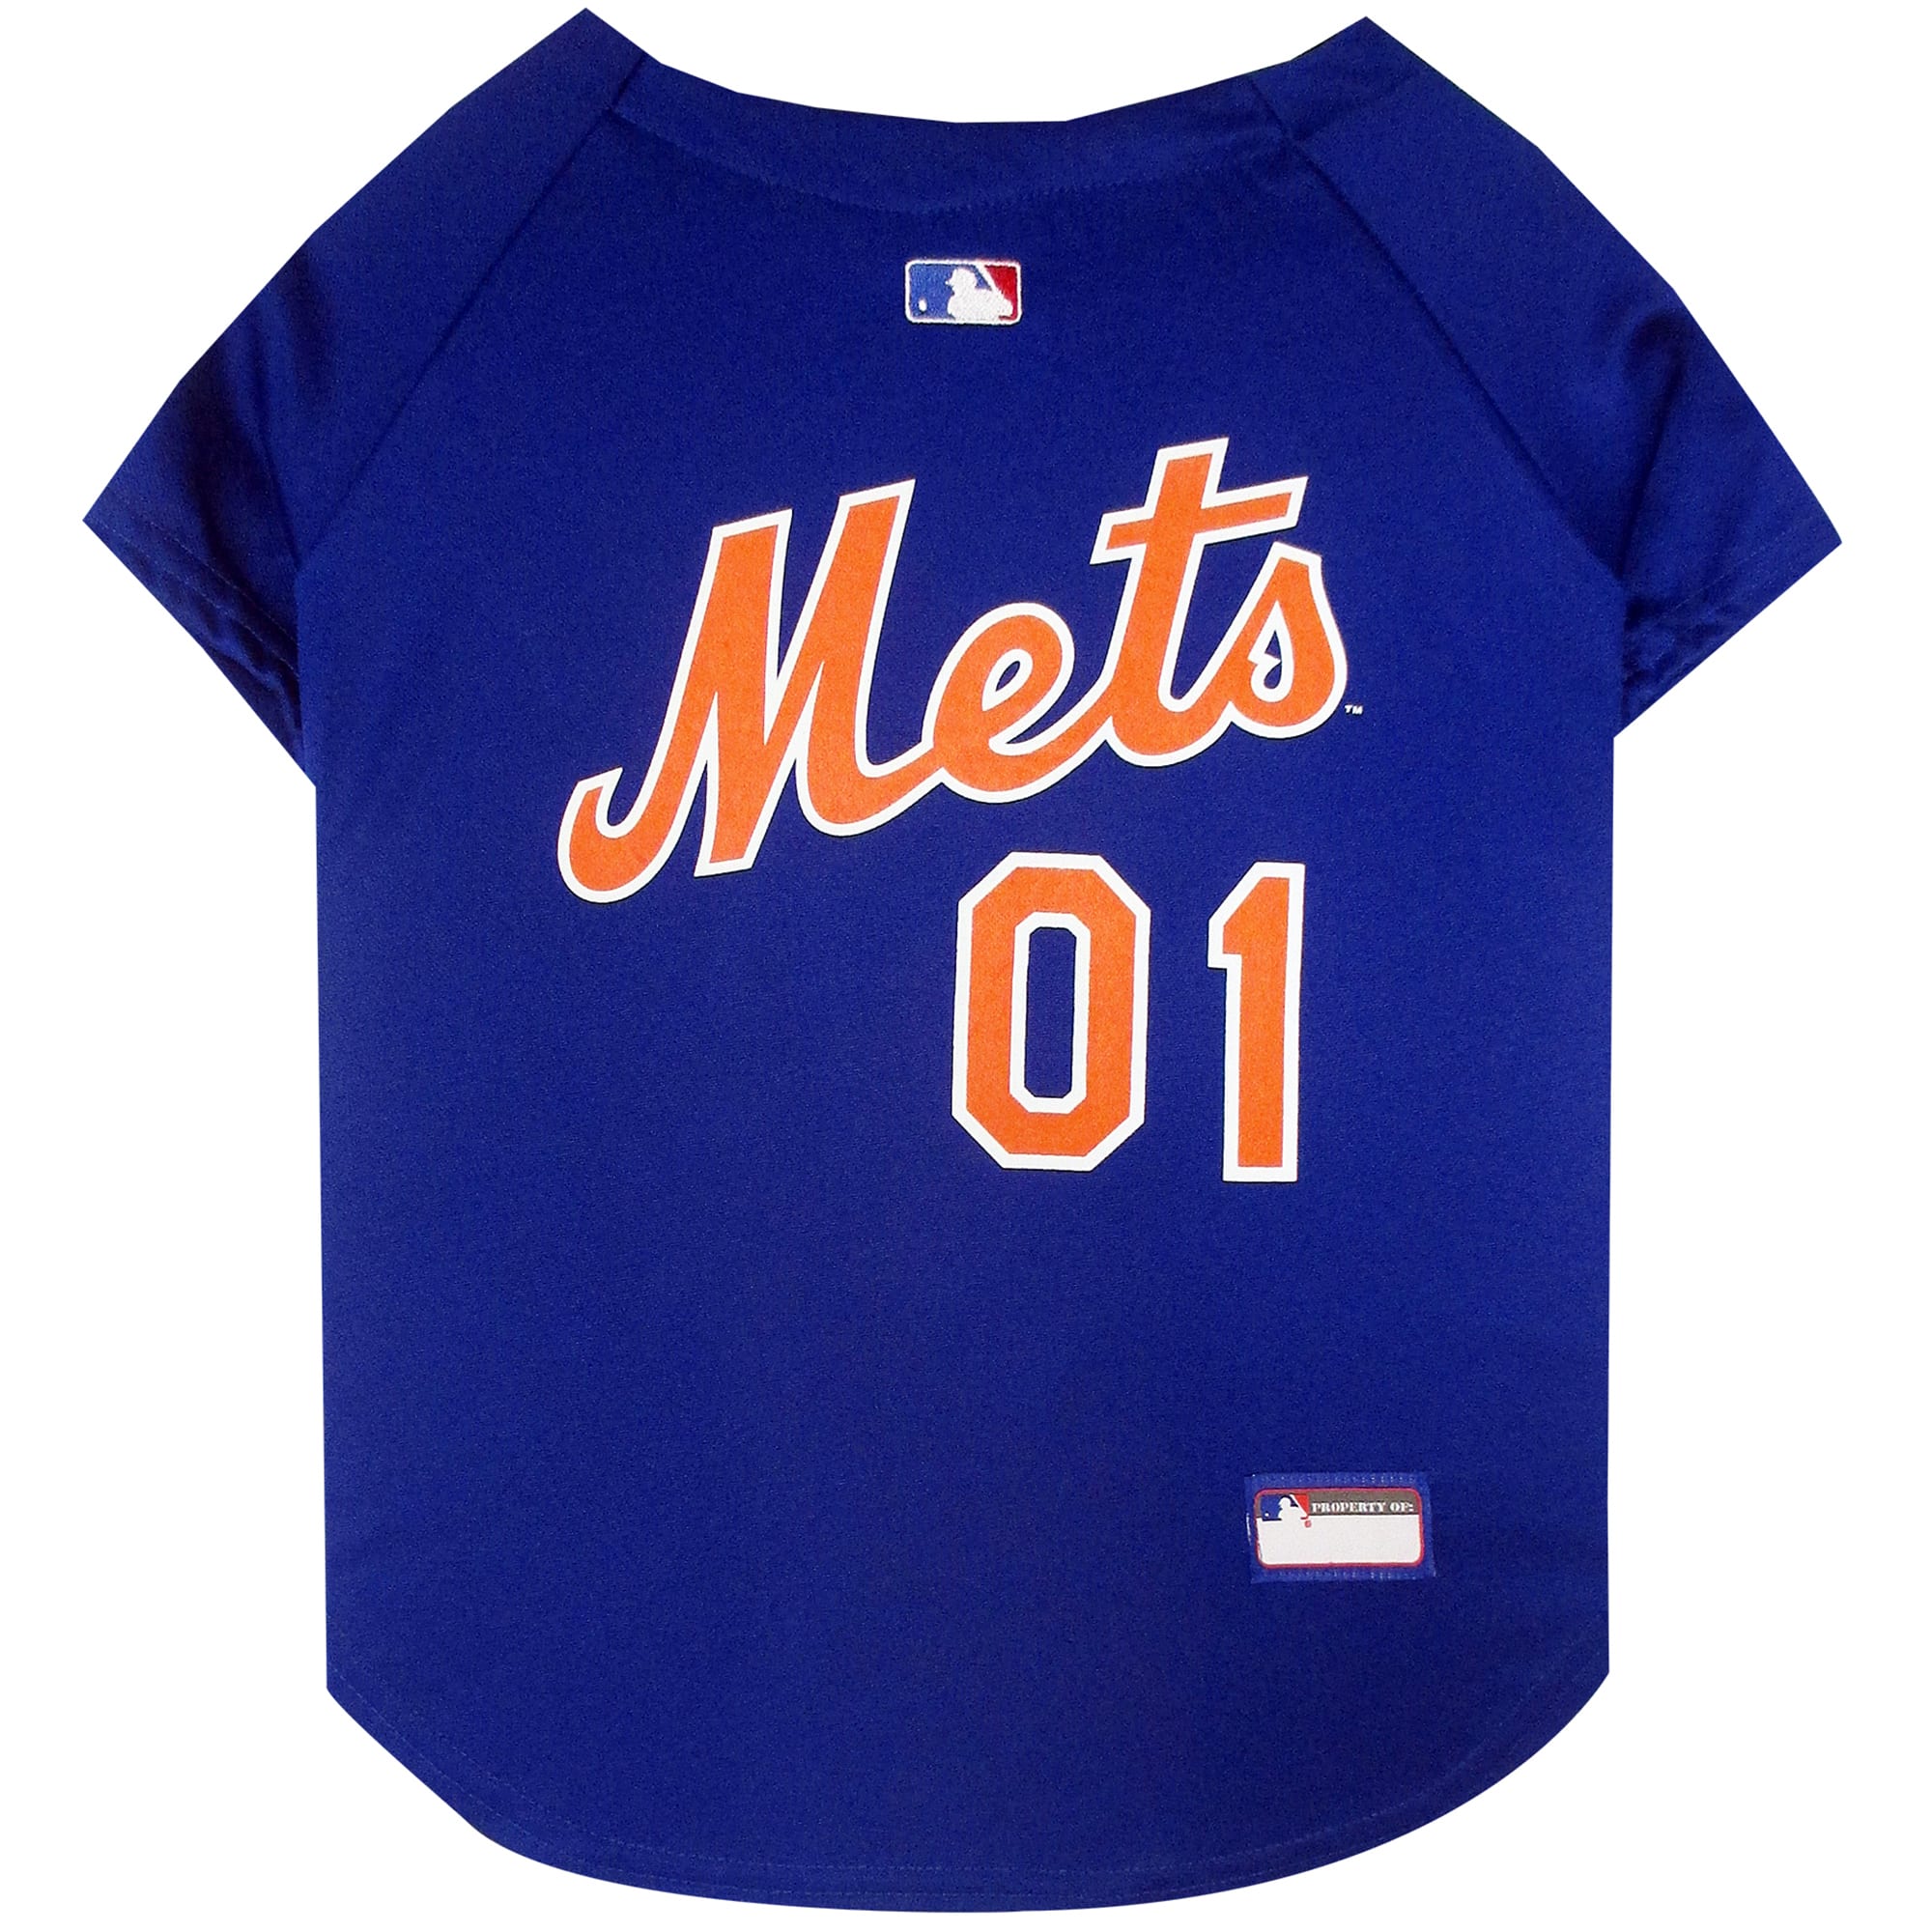 new york mets clothing